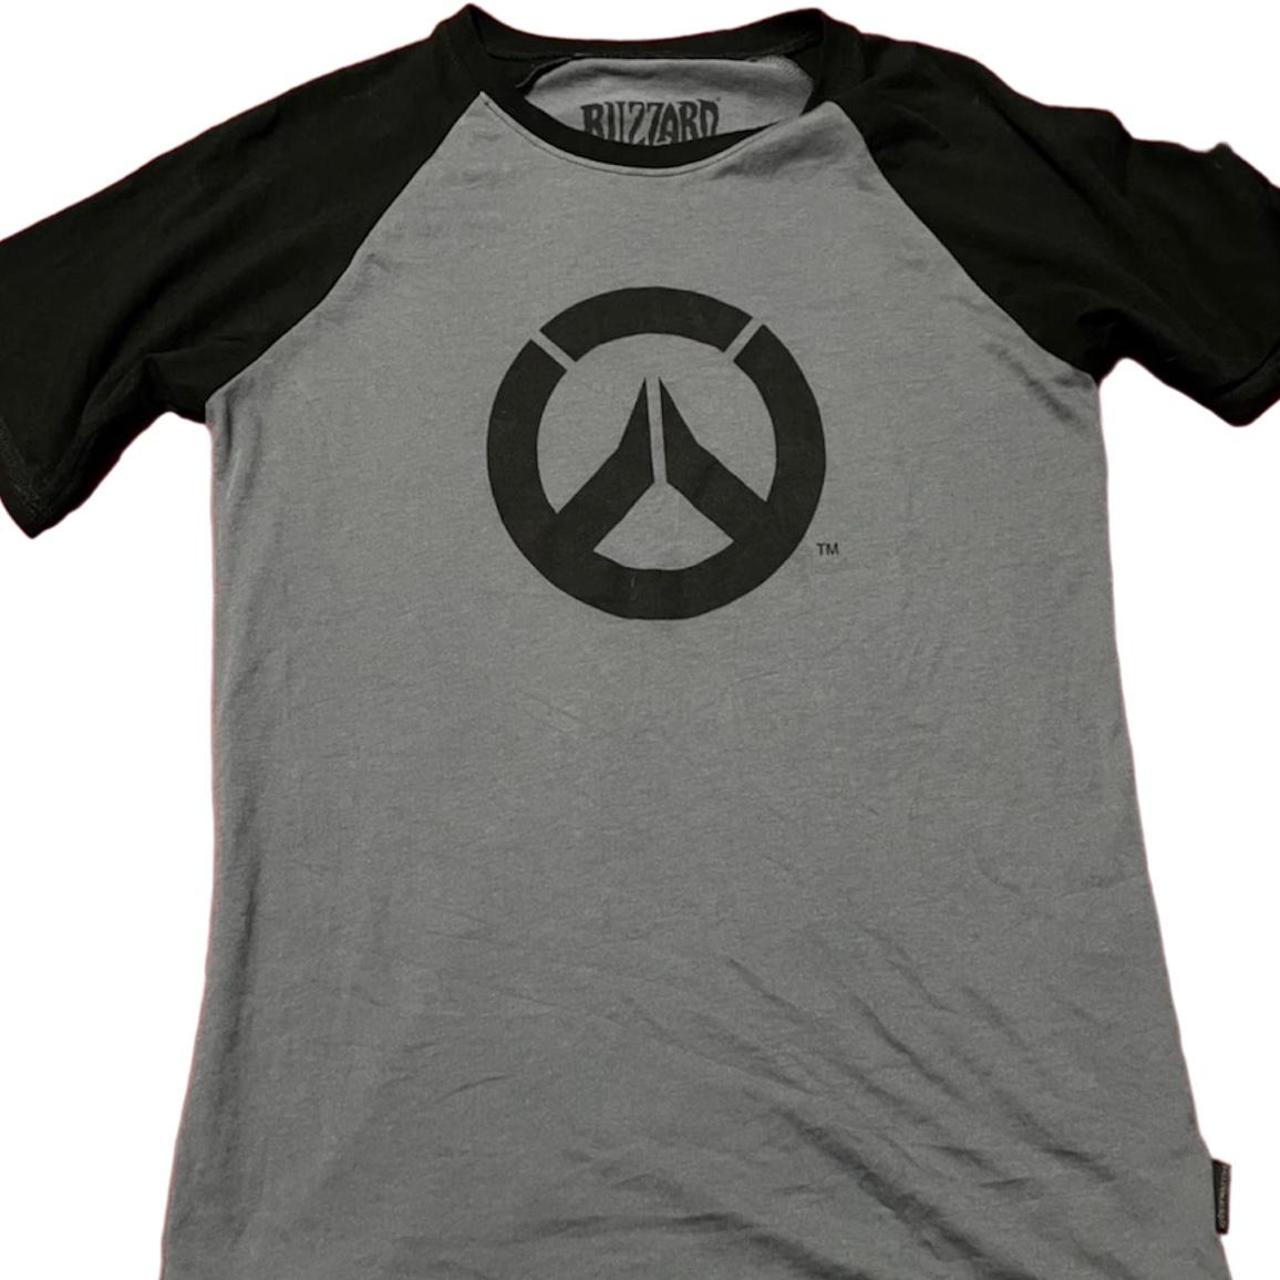 Product Image 1 - Overwatch logo black and grey